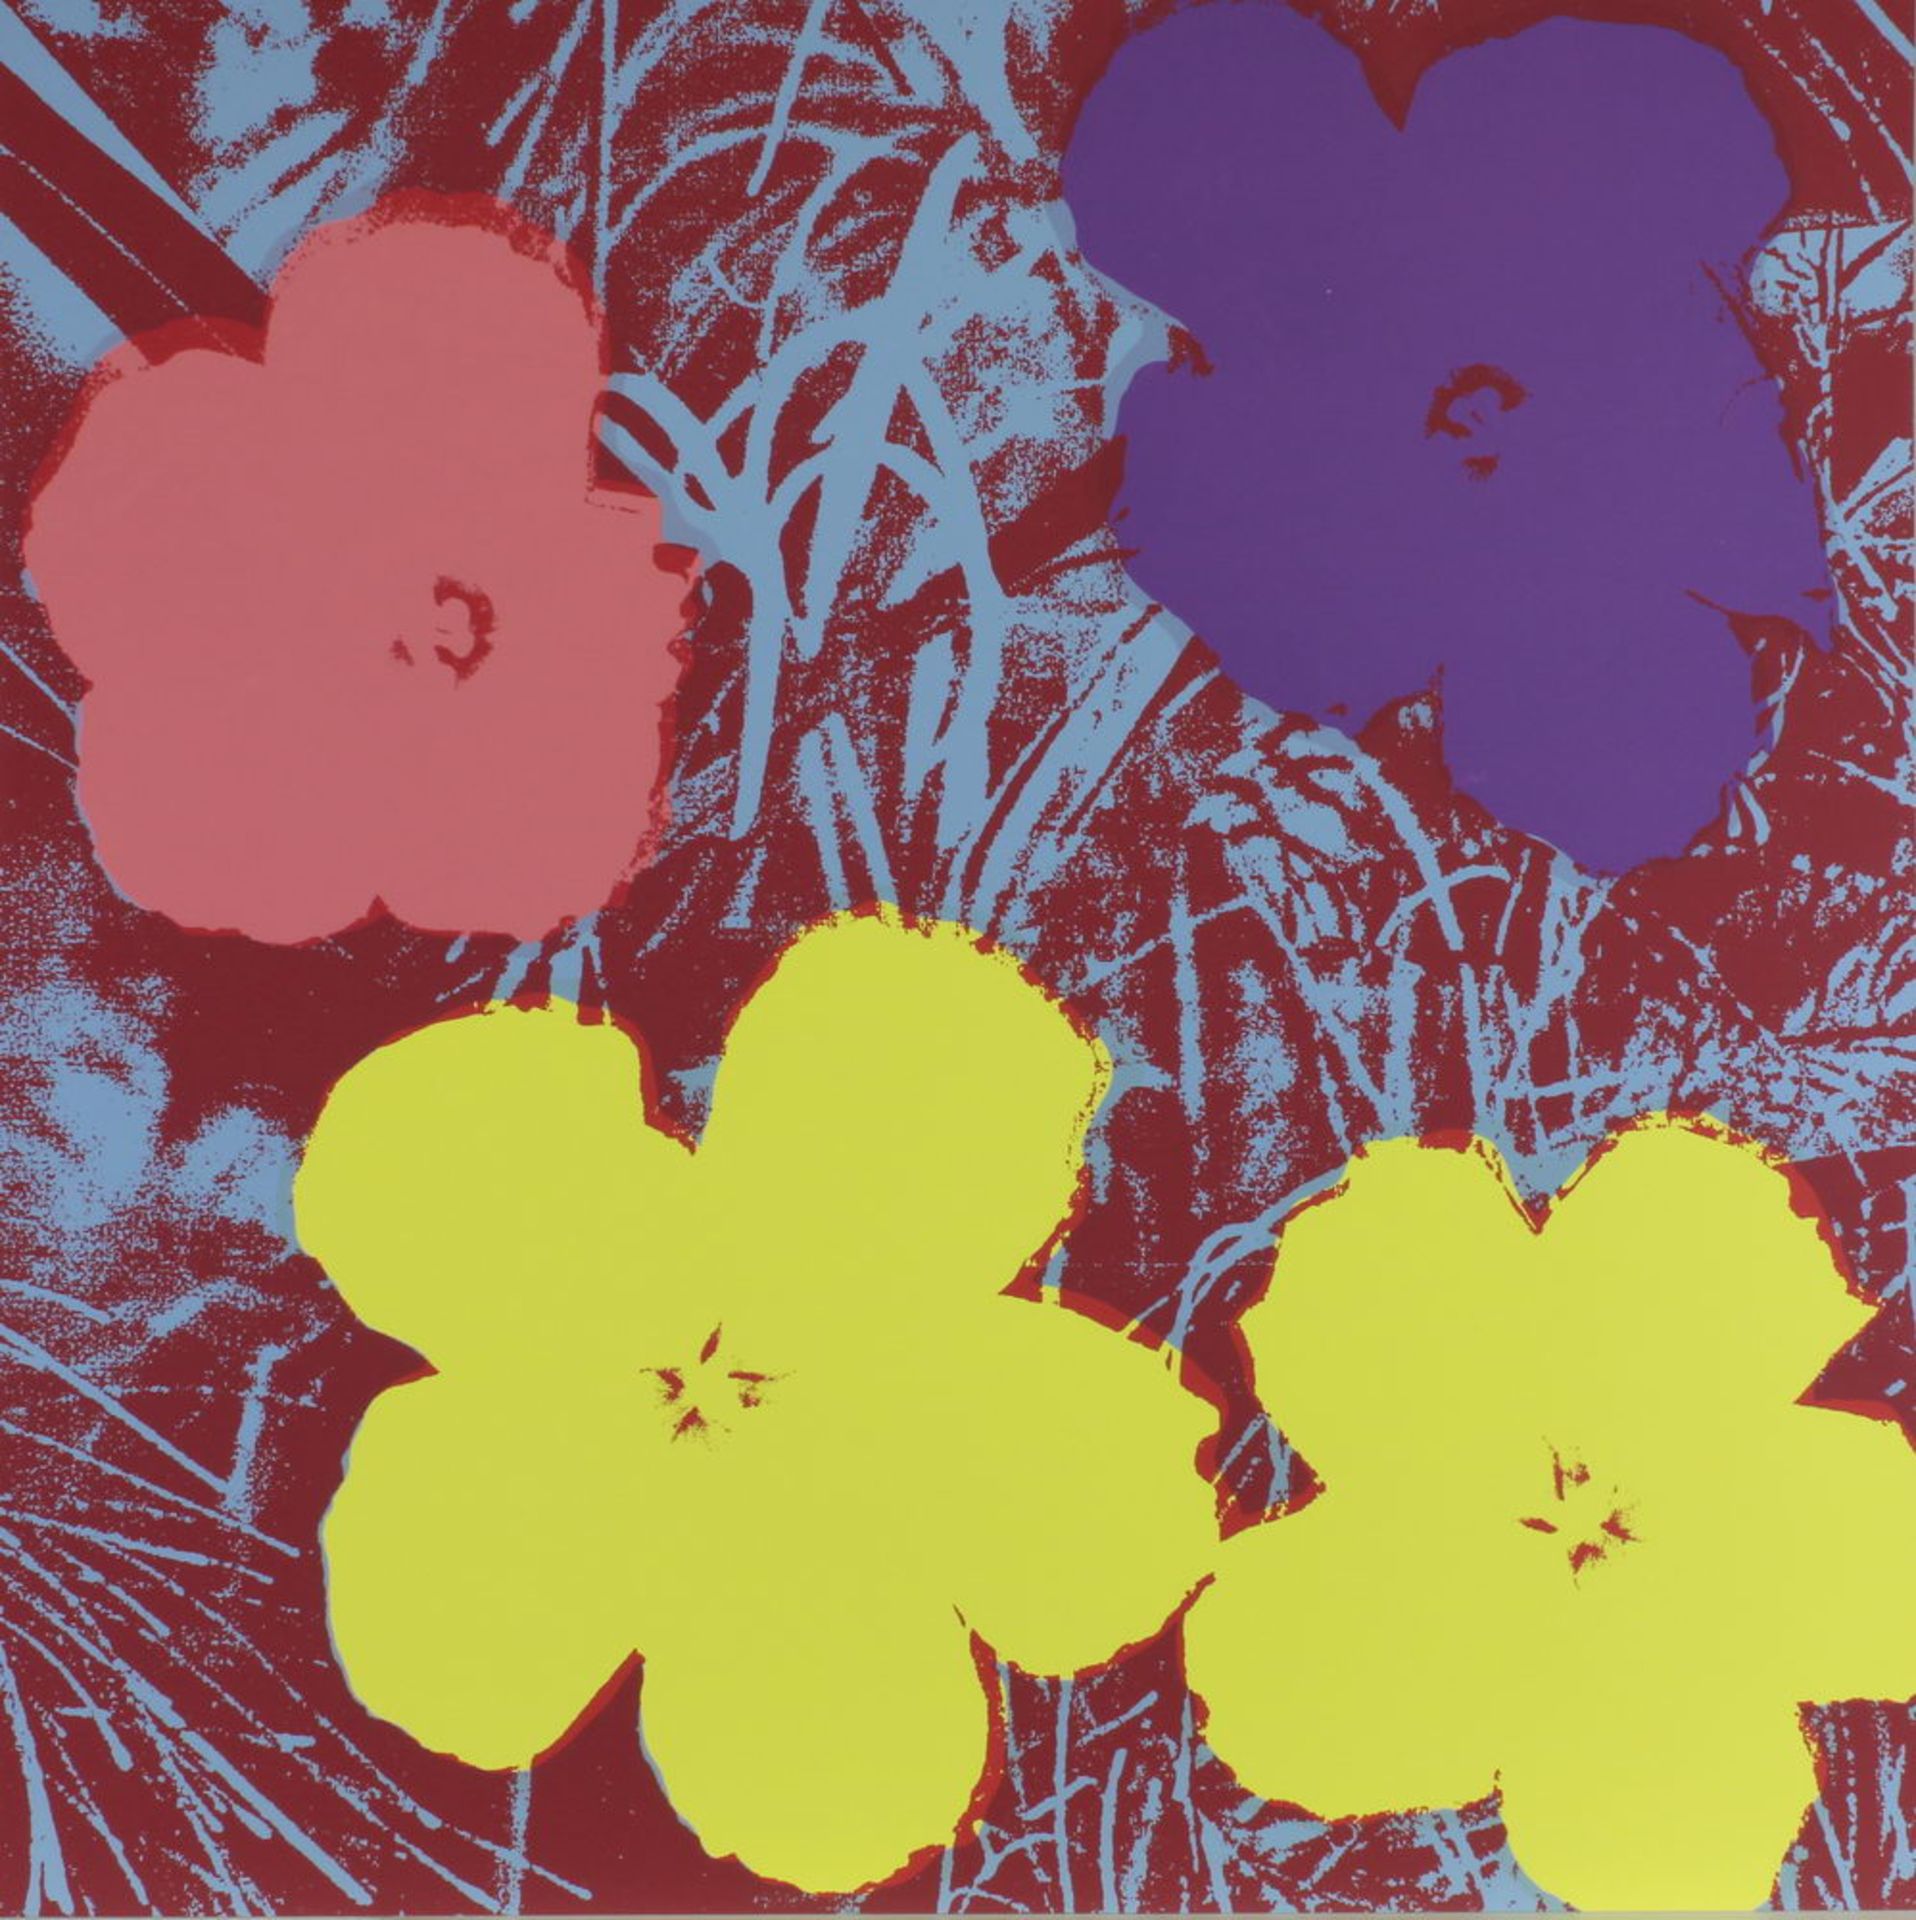 Warhol, Andy (1928 Pittsburgh - 1987 New York), 10 Farbserigrafien, "Flowers", published by Sunday - Image 7 of 10